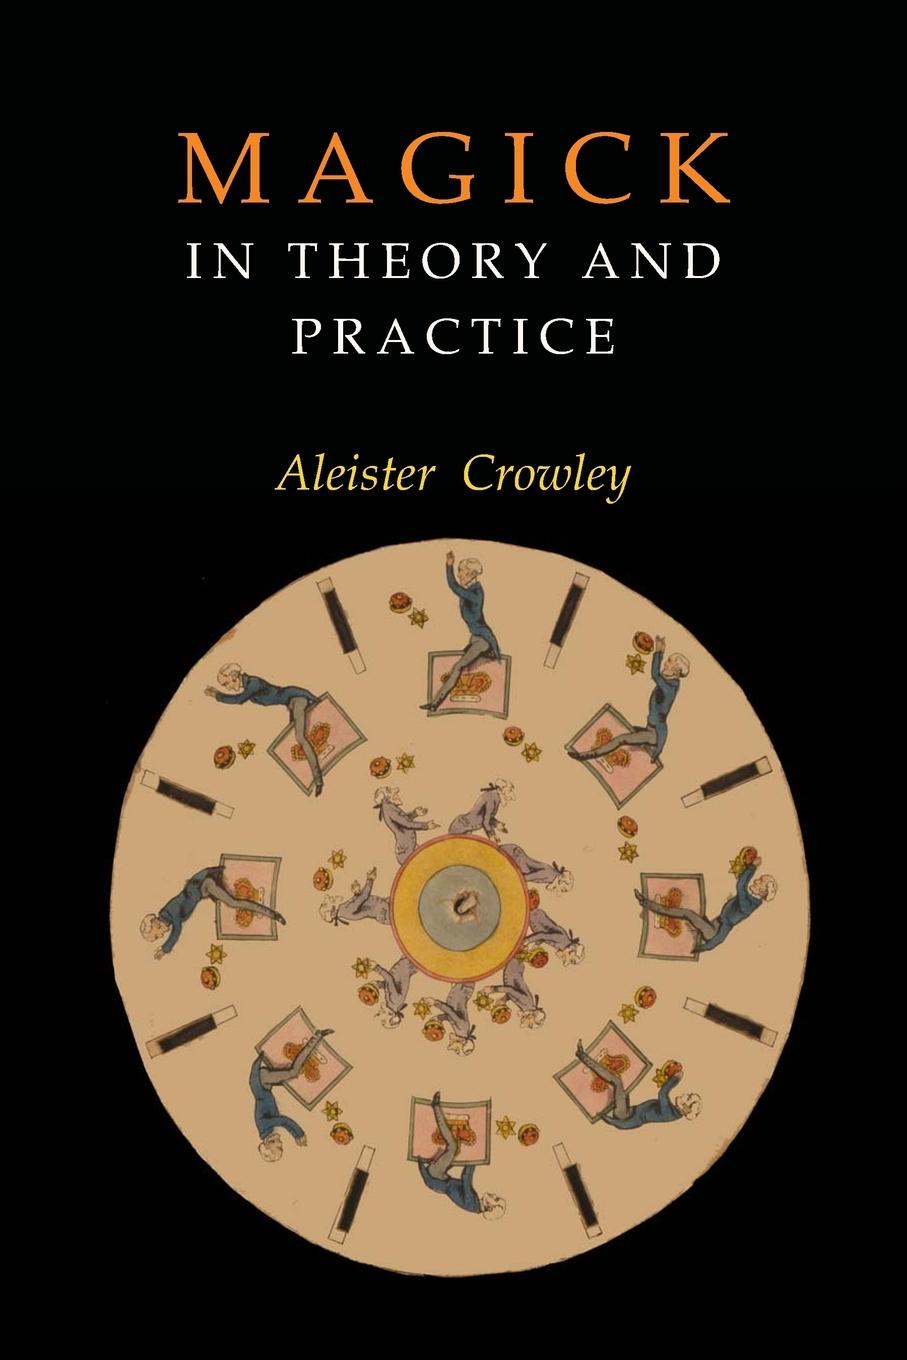 Book Magick in Theory and Practice Aleister Crowley